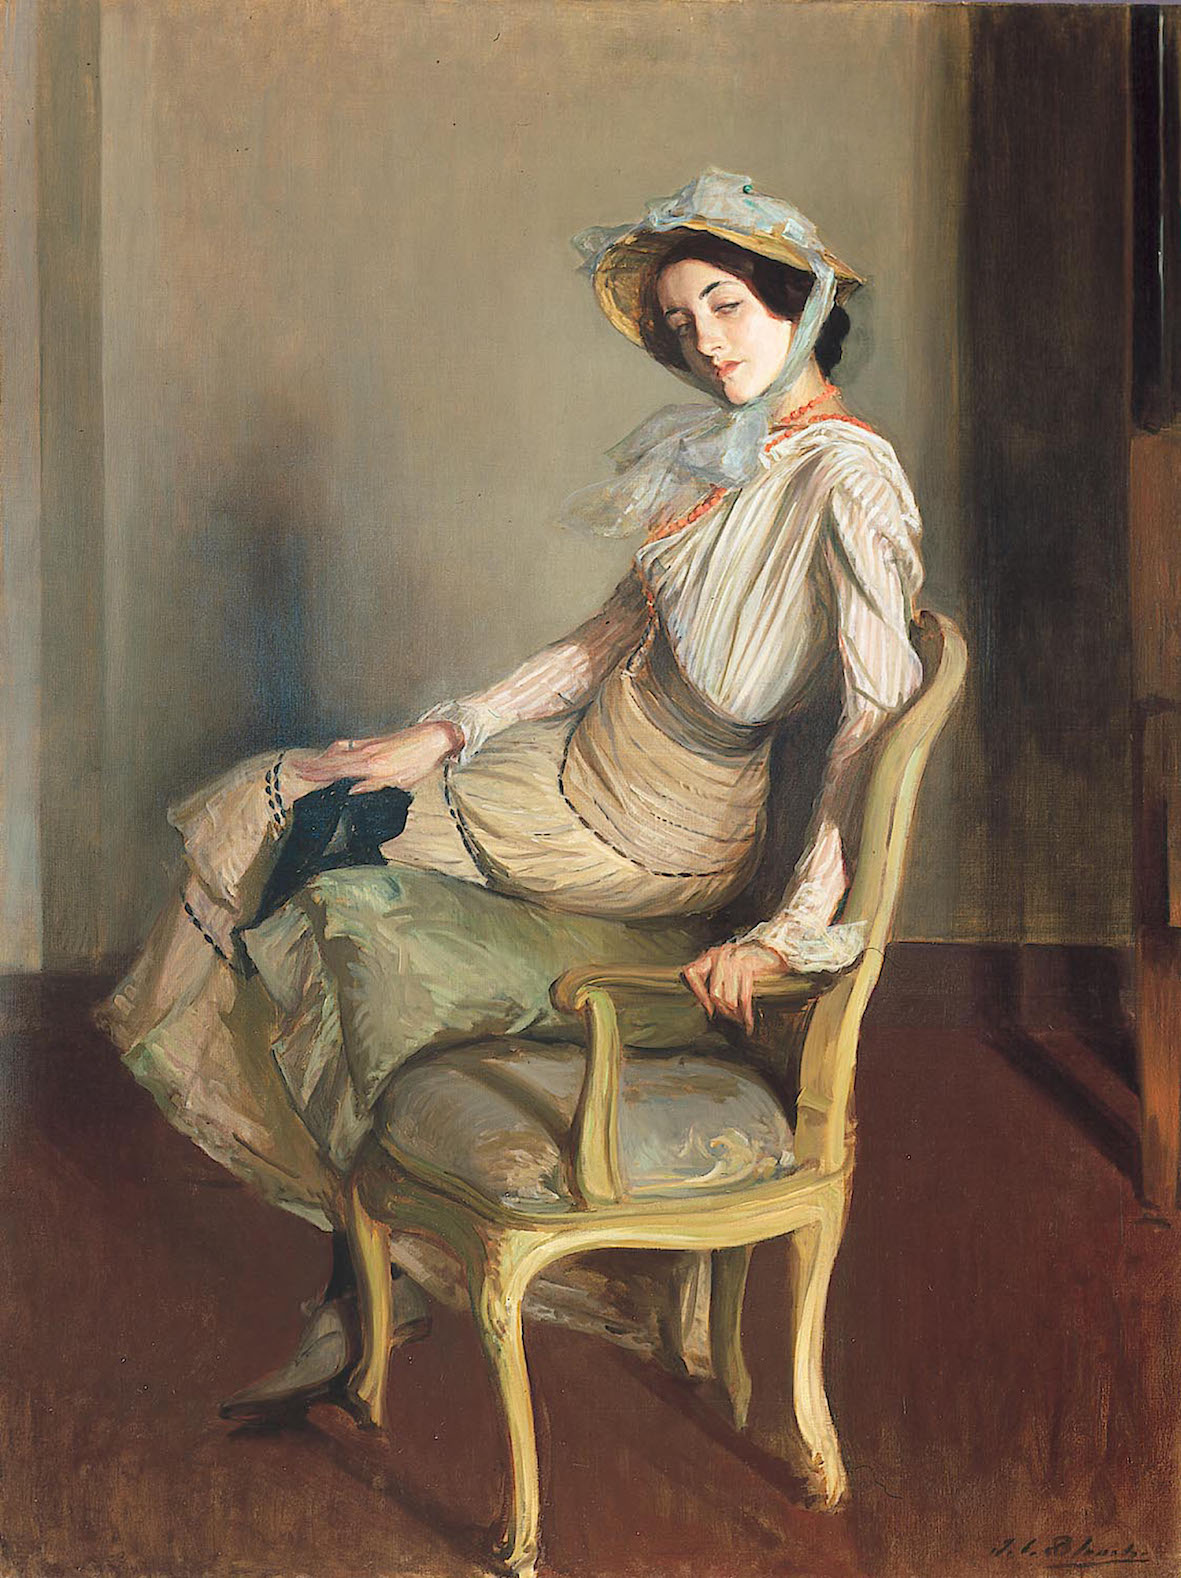 BLANCHE Portrait of Desirée Manfred (The Summer Girl)